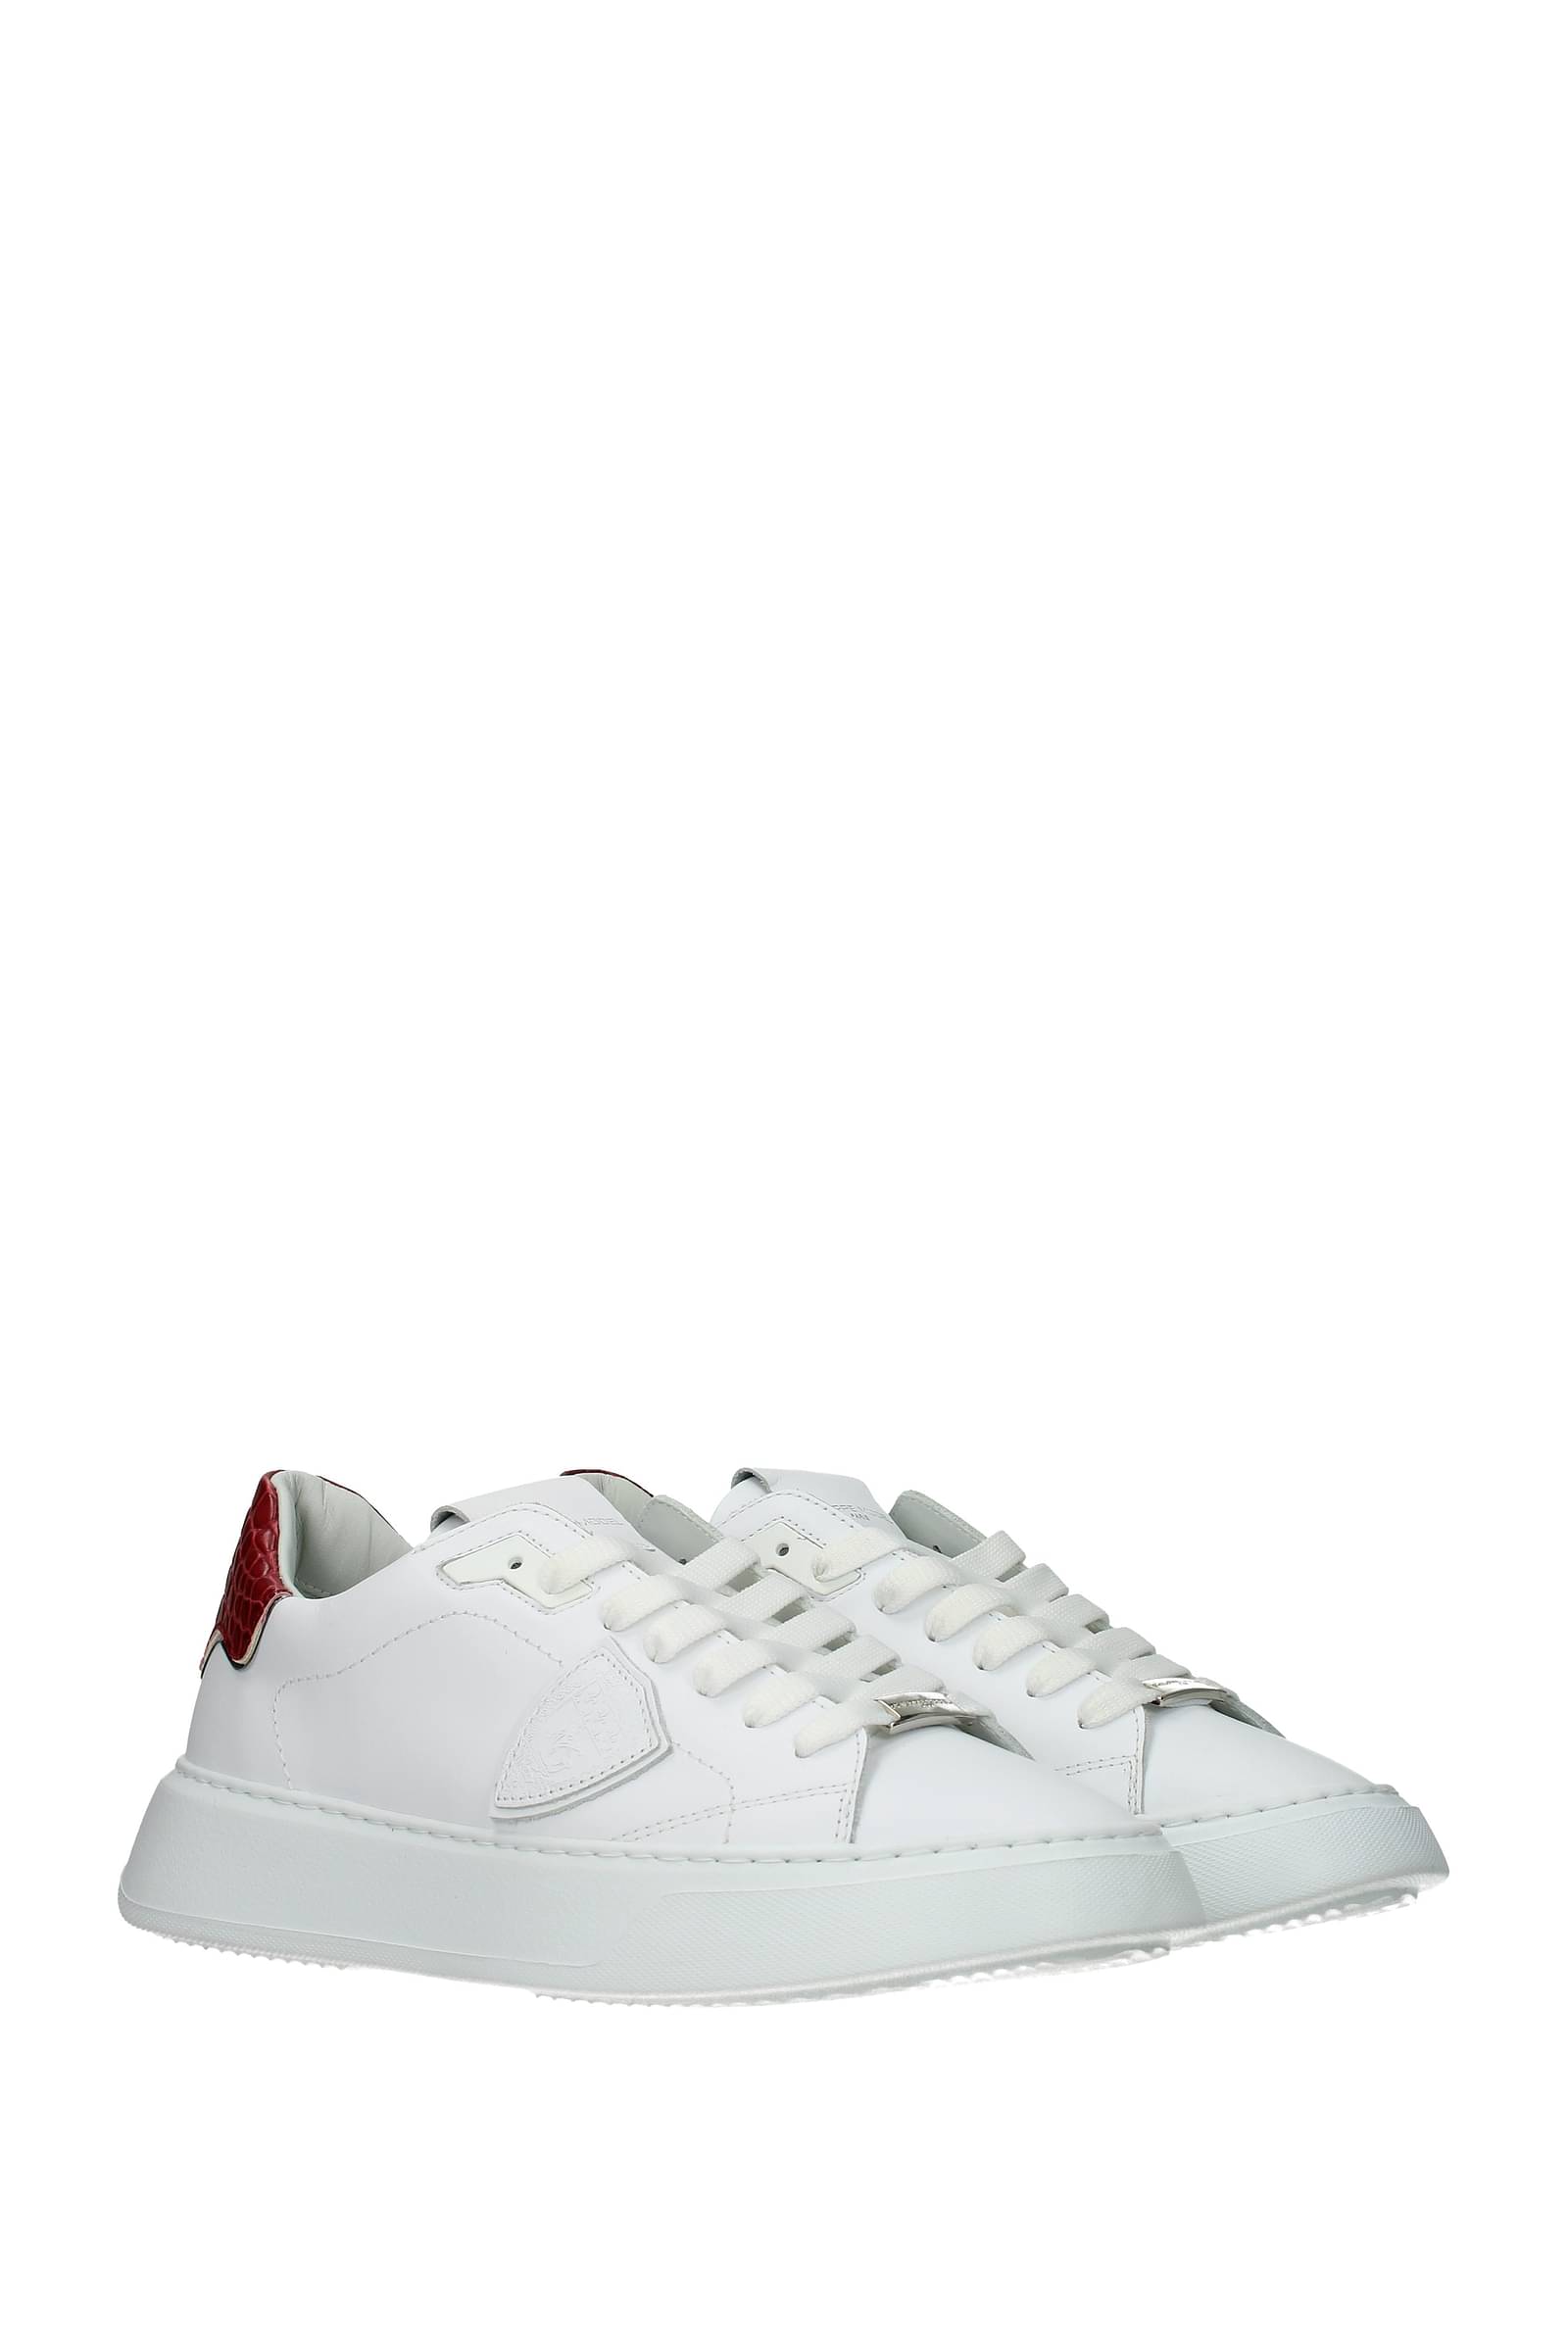 Philippe Model Sneakers temple low Men Leather White Red